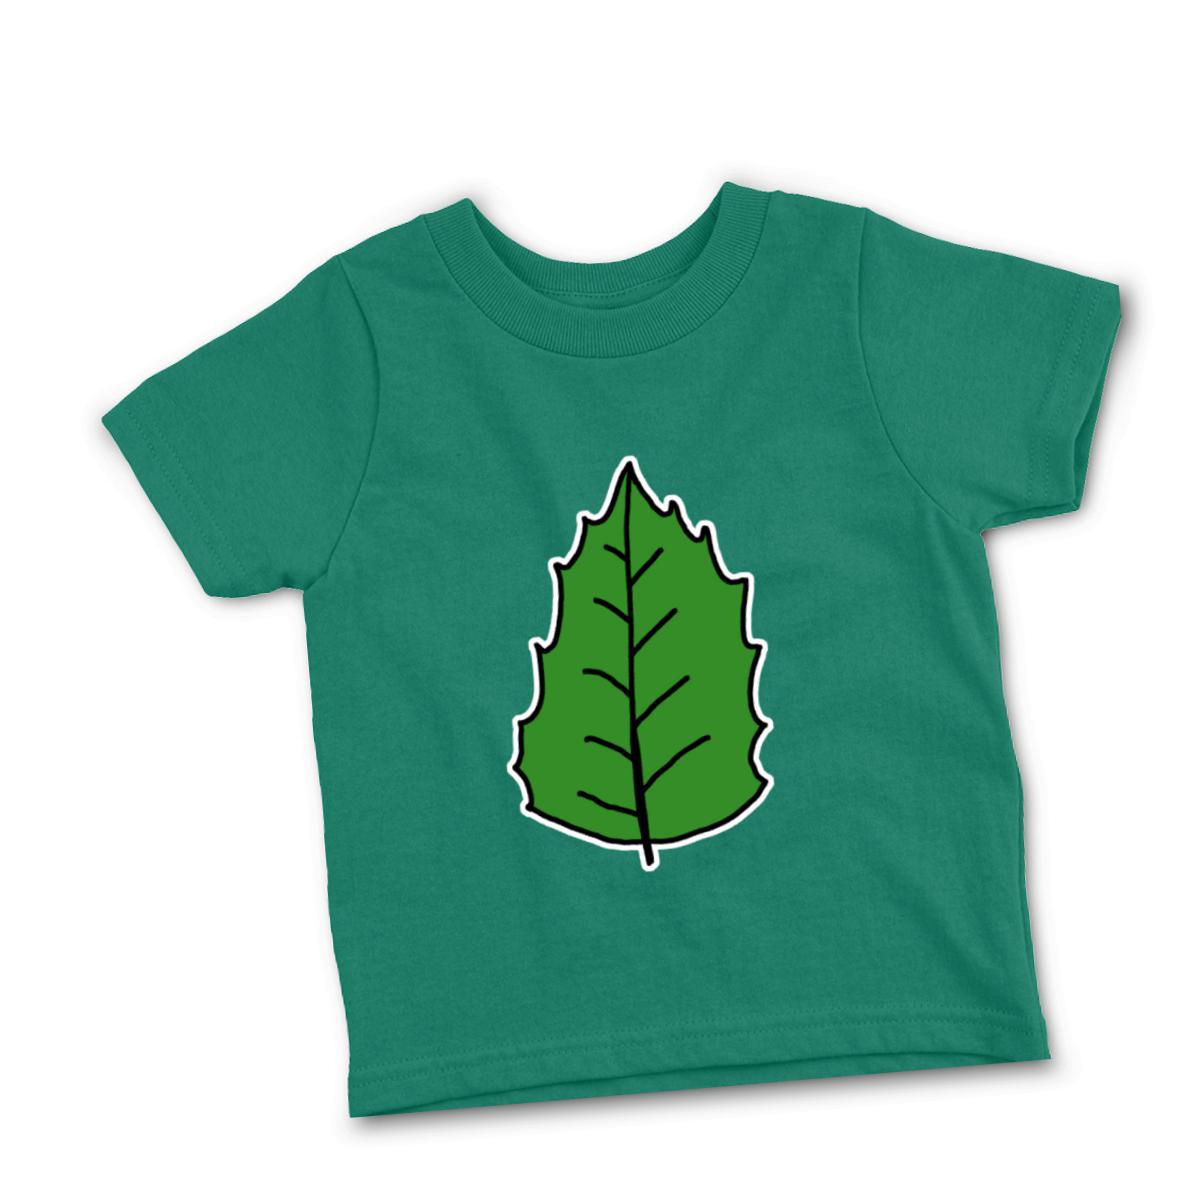 Holly Leaf Toddler Tee 56T kelly